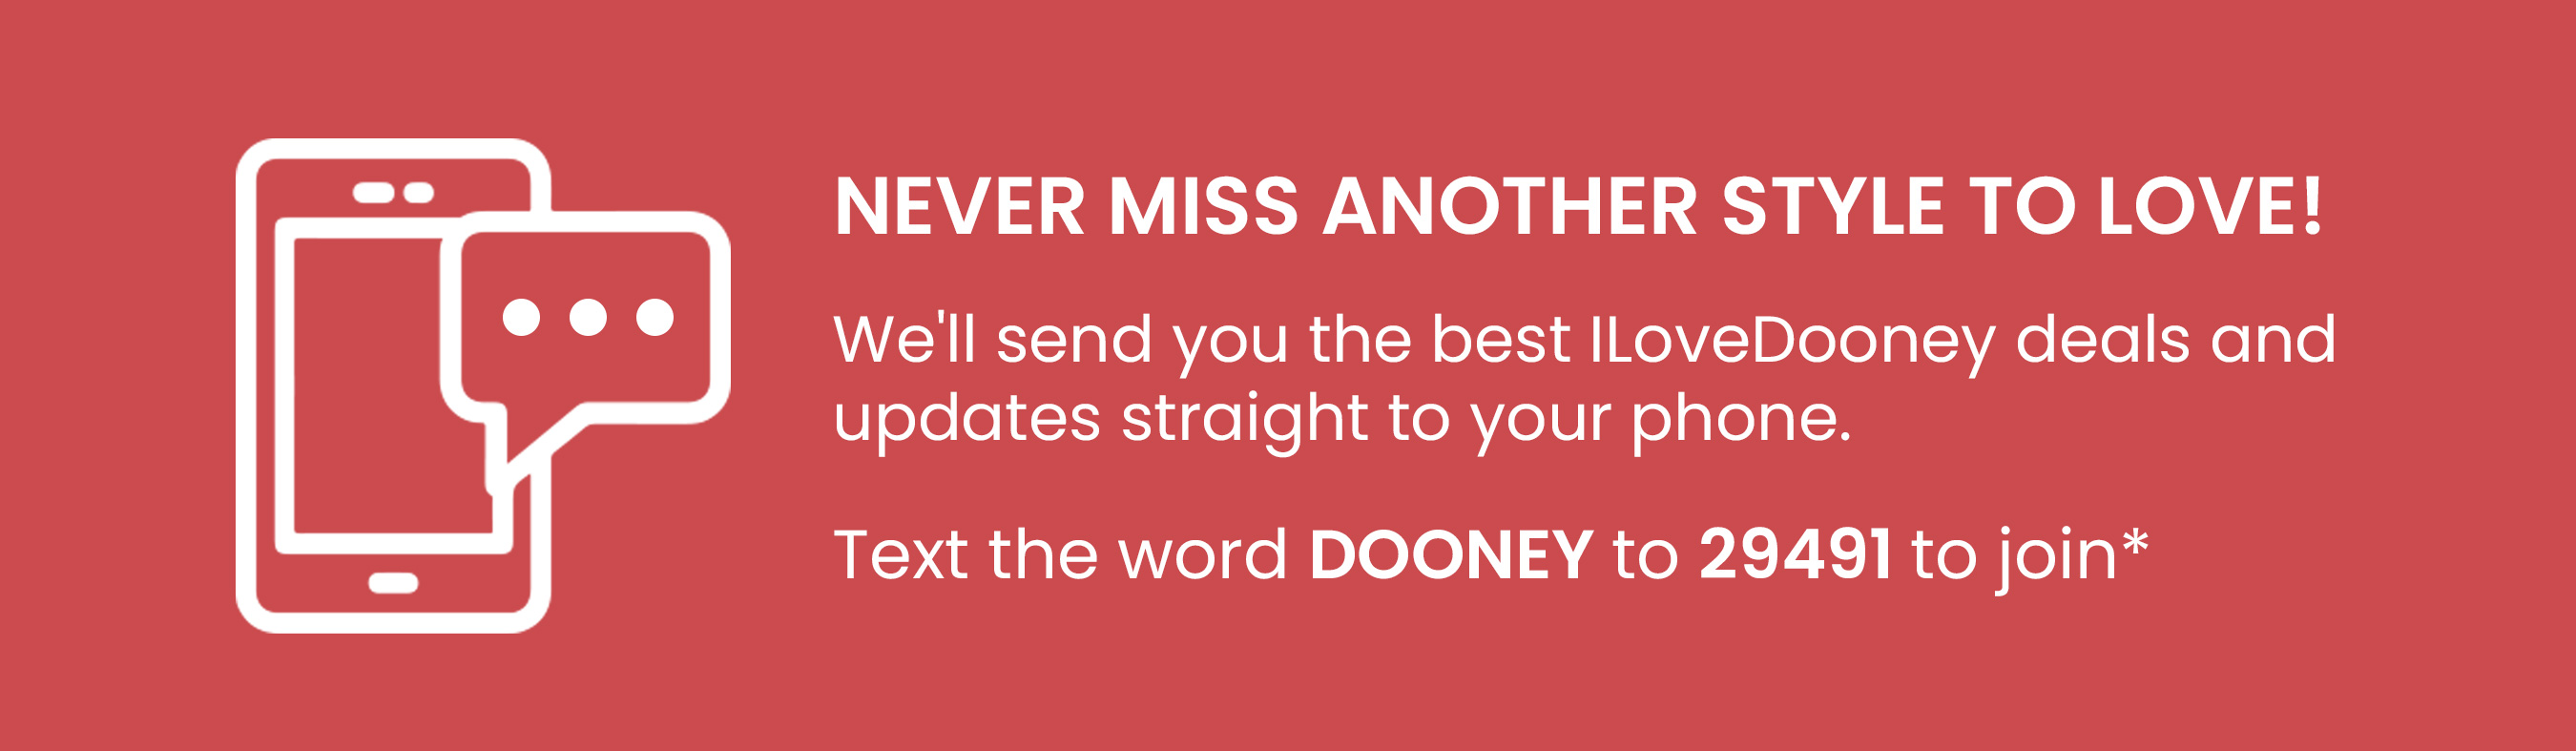 NEVER MISS ANOTHER STYLE TO LOVE! Well send you the best ILoveDooney deals and updates straight to your phone. Text the word DOONEY to 29491 to join* 